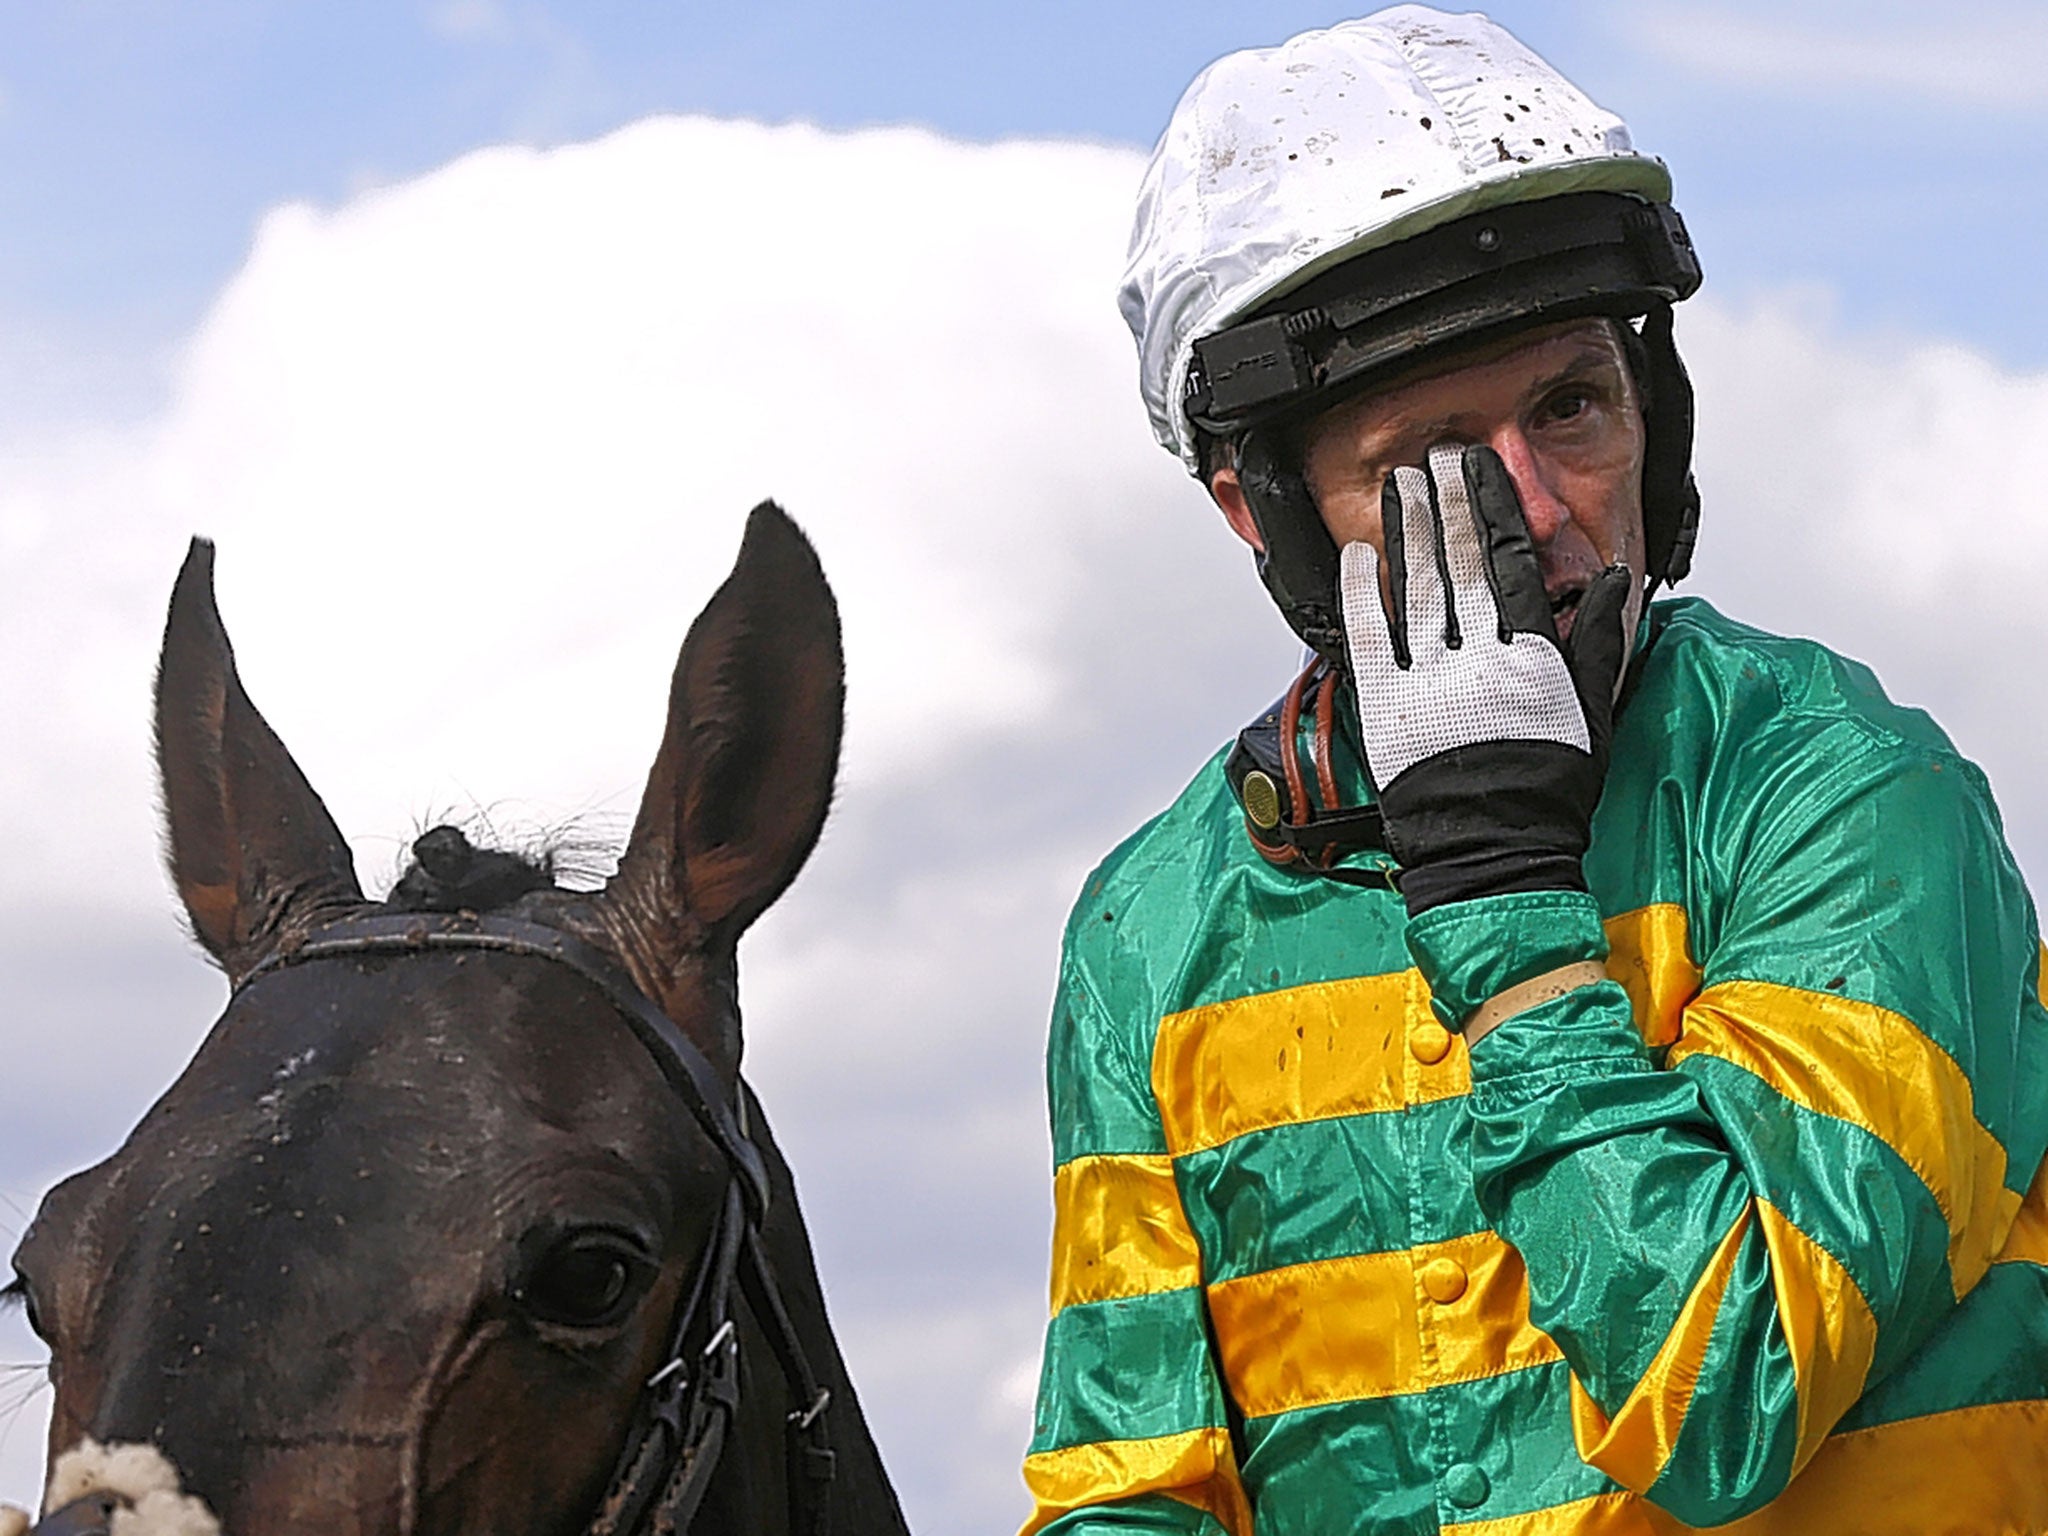 An emotional Tony McCoy after finishing third on Box Office in his final race